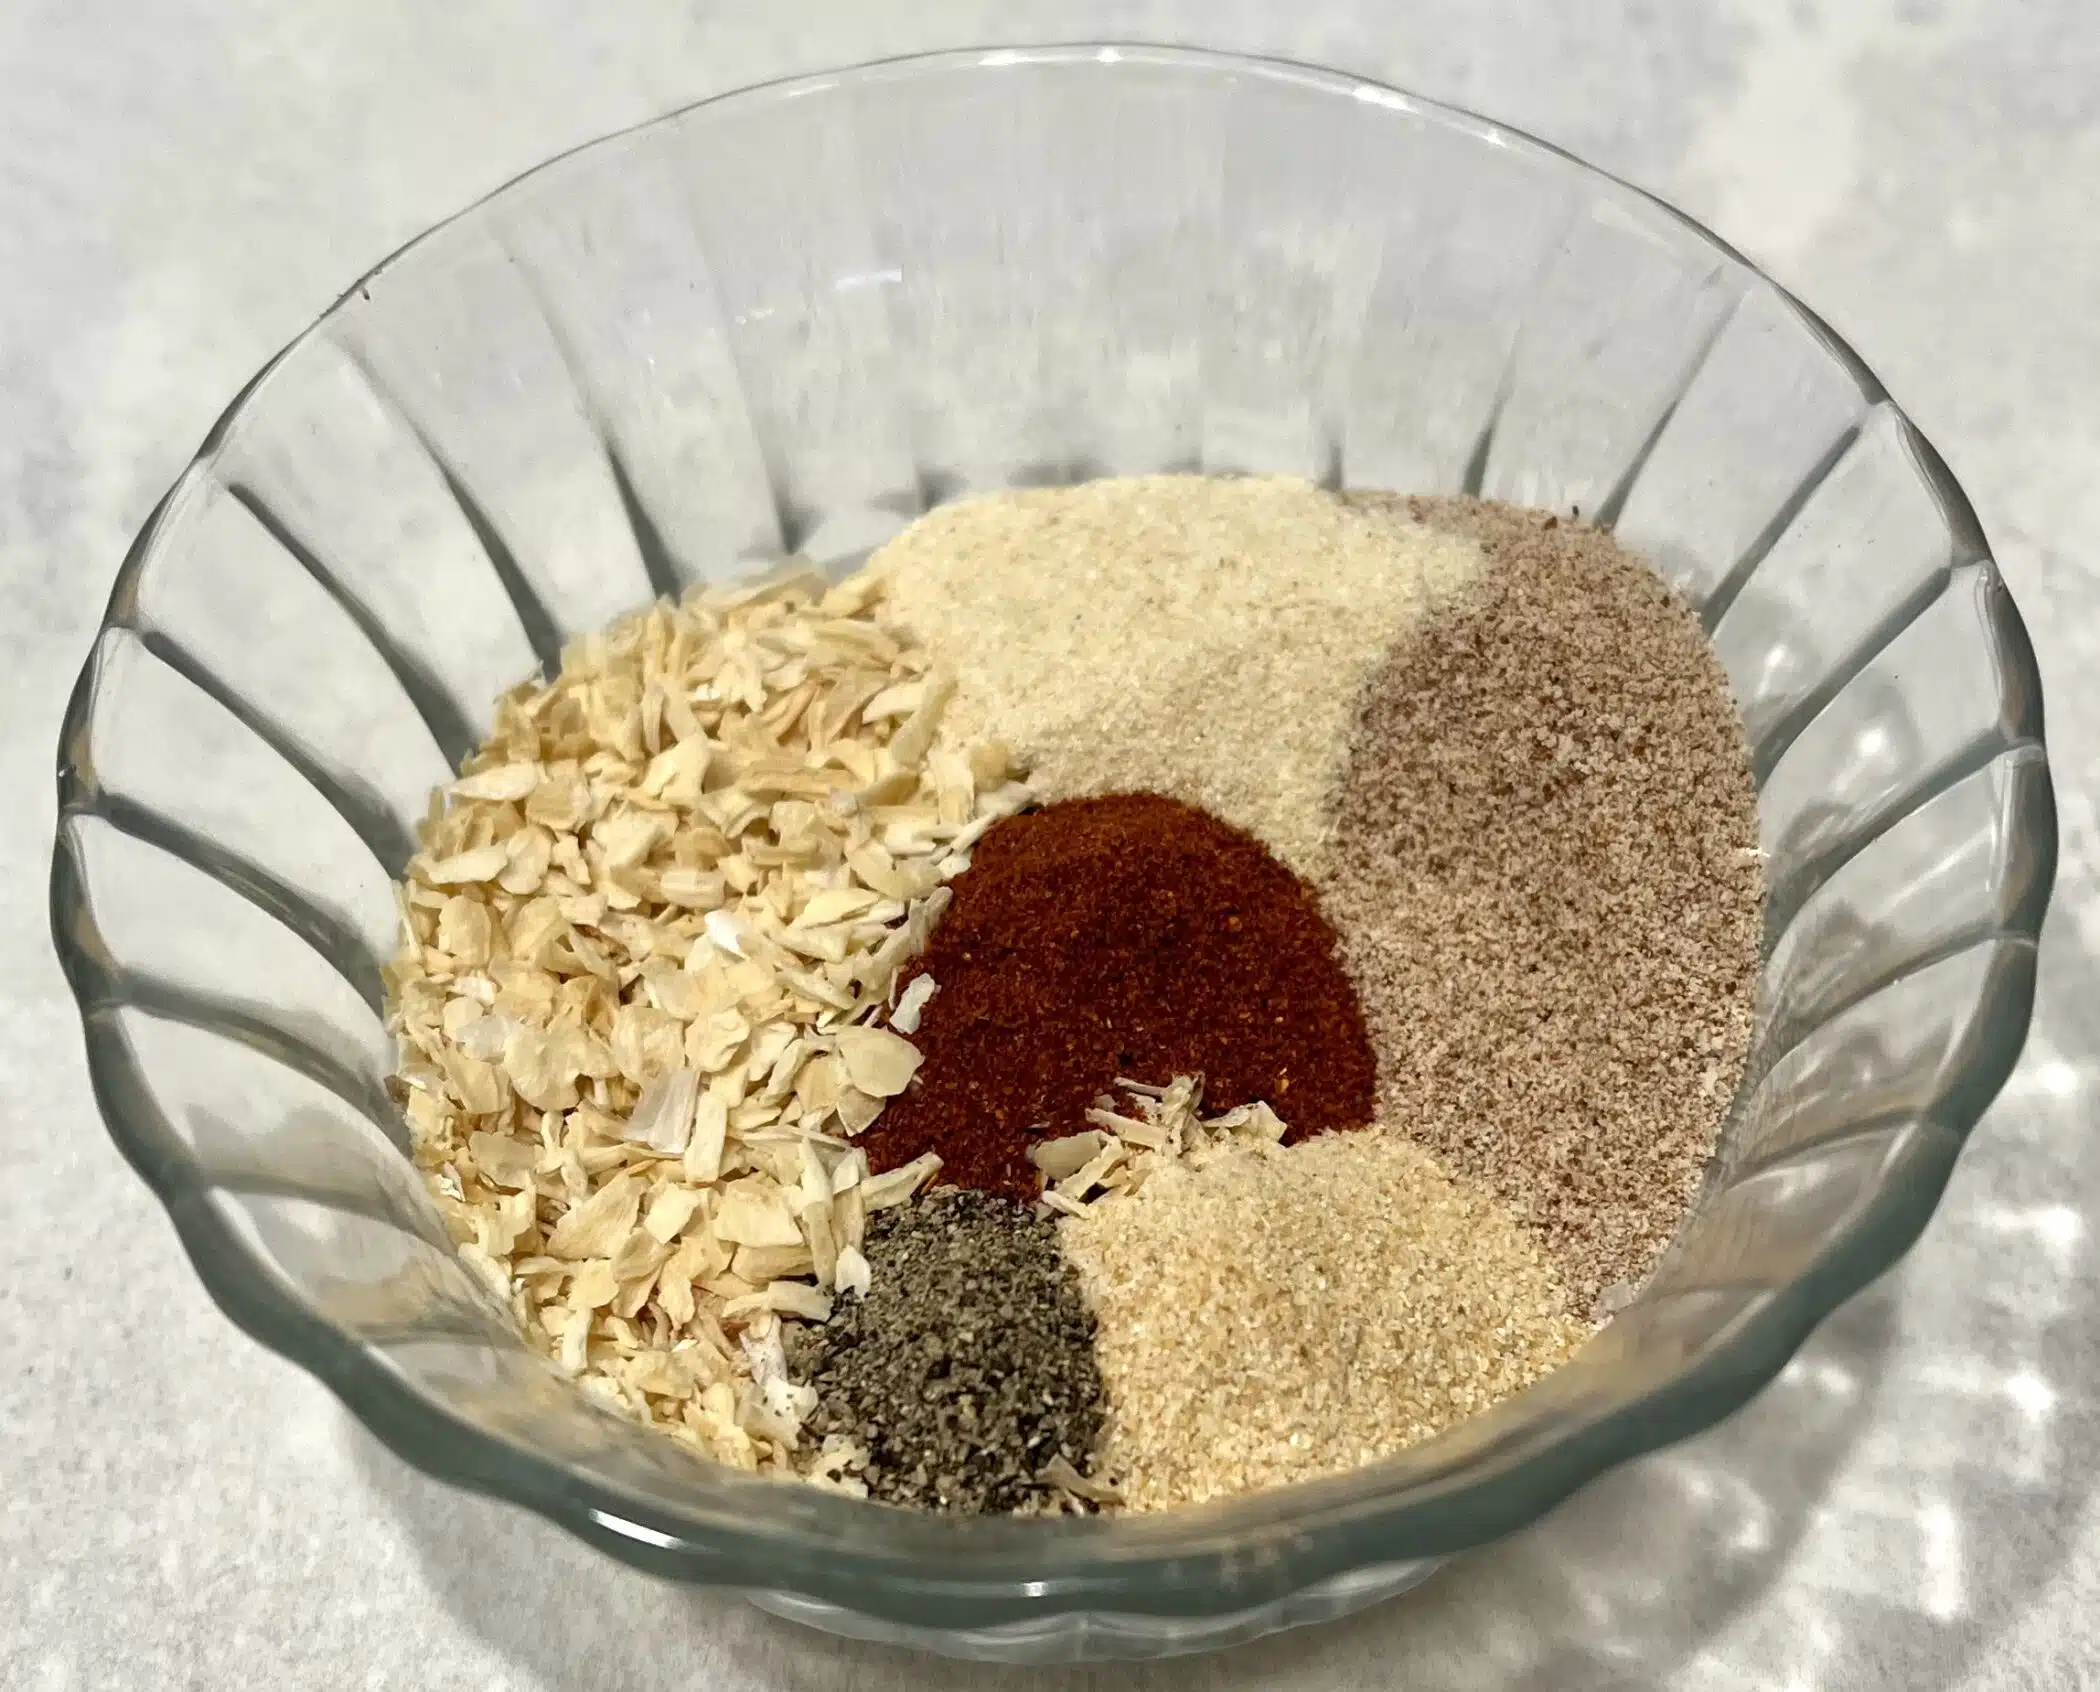 ingredients for onion soup mix in a glass bowl